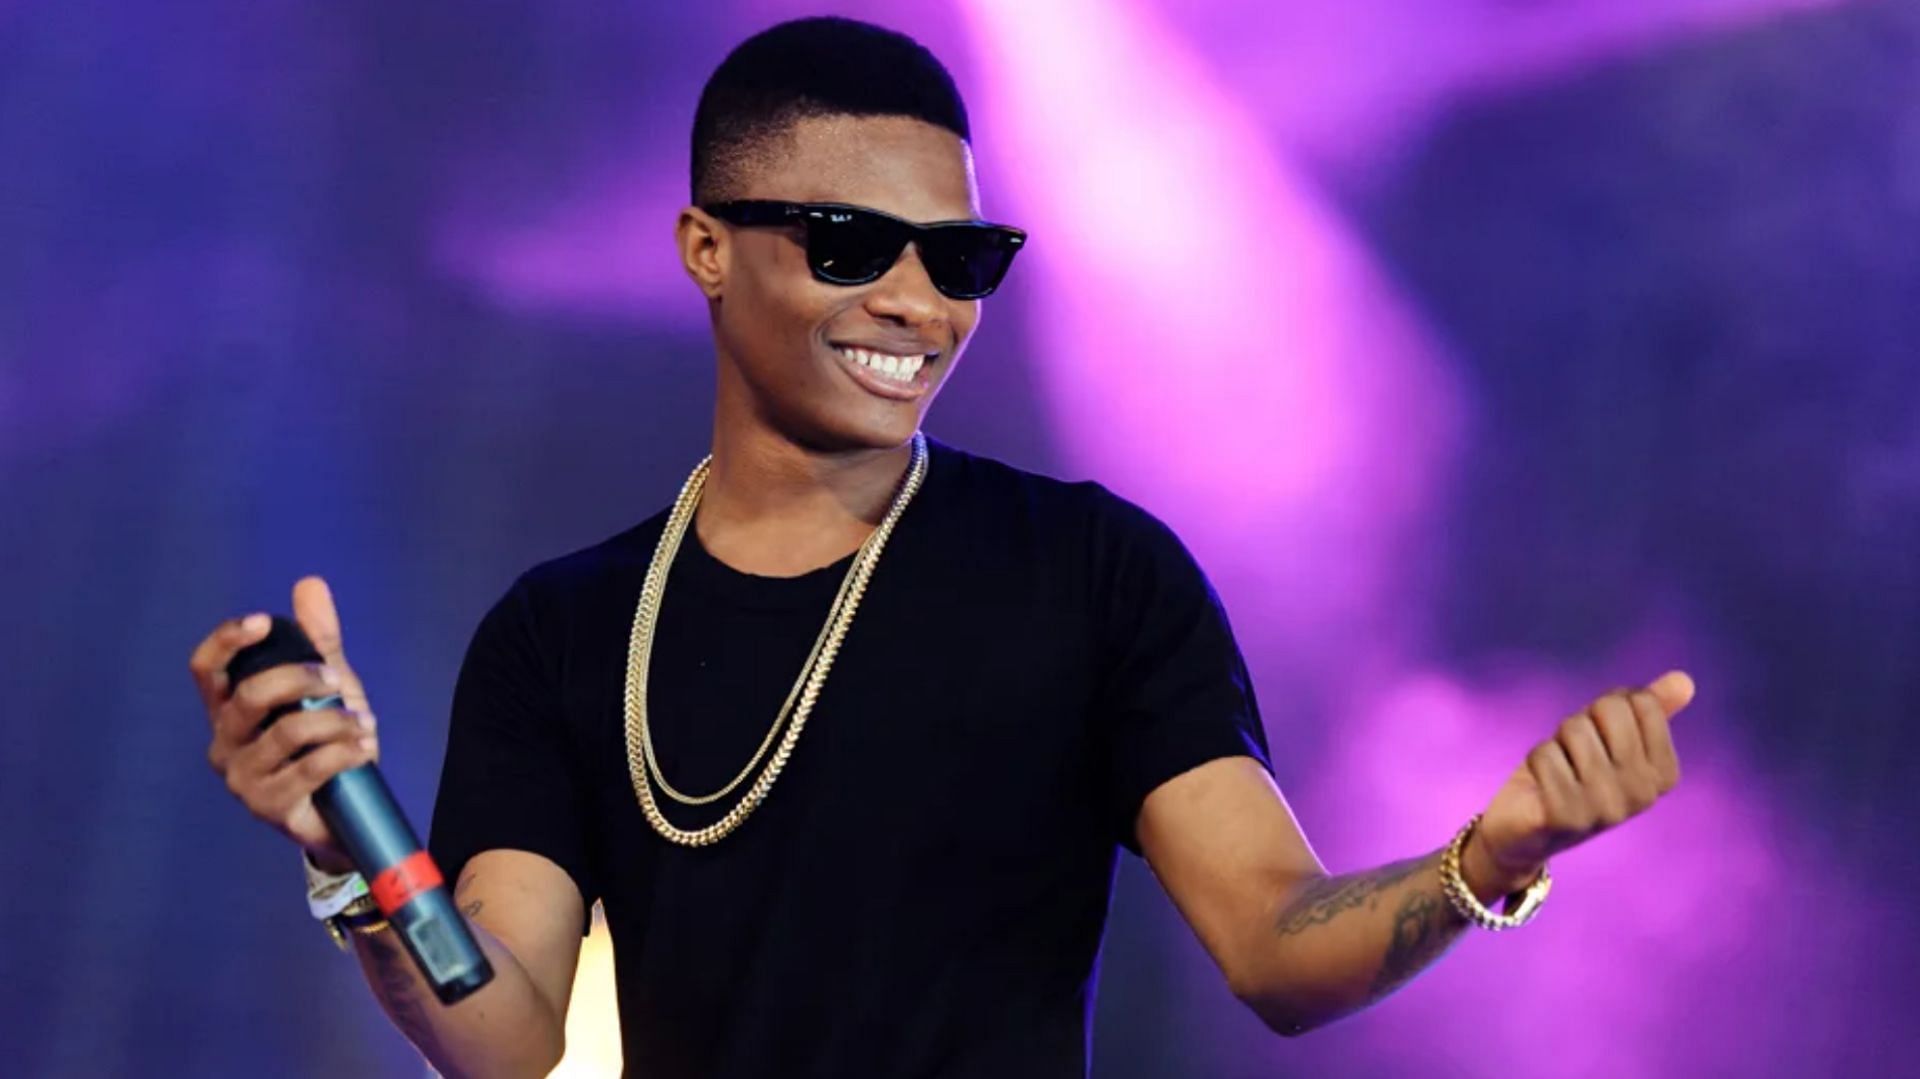 Wizkid is set to perfrom at the MSG in November. (Image via Joseph Okapako / Getty Images)